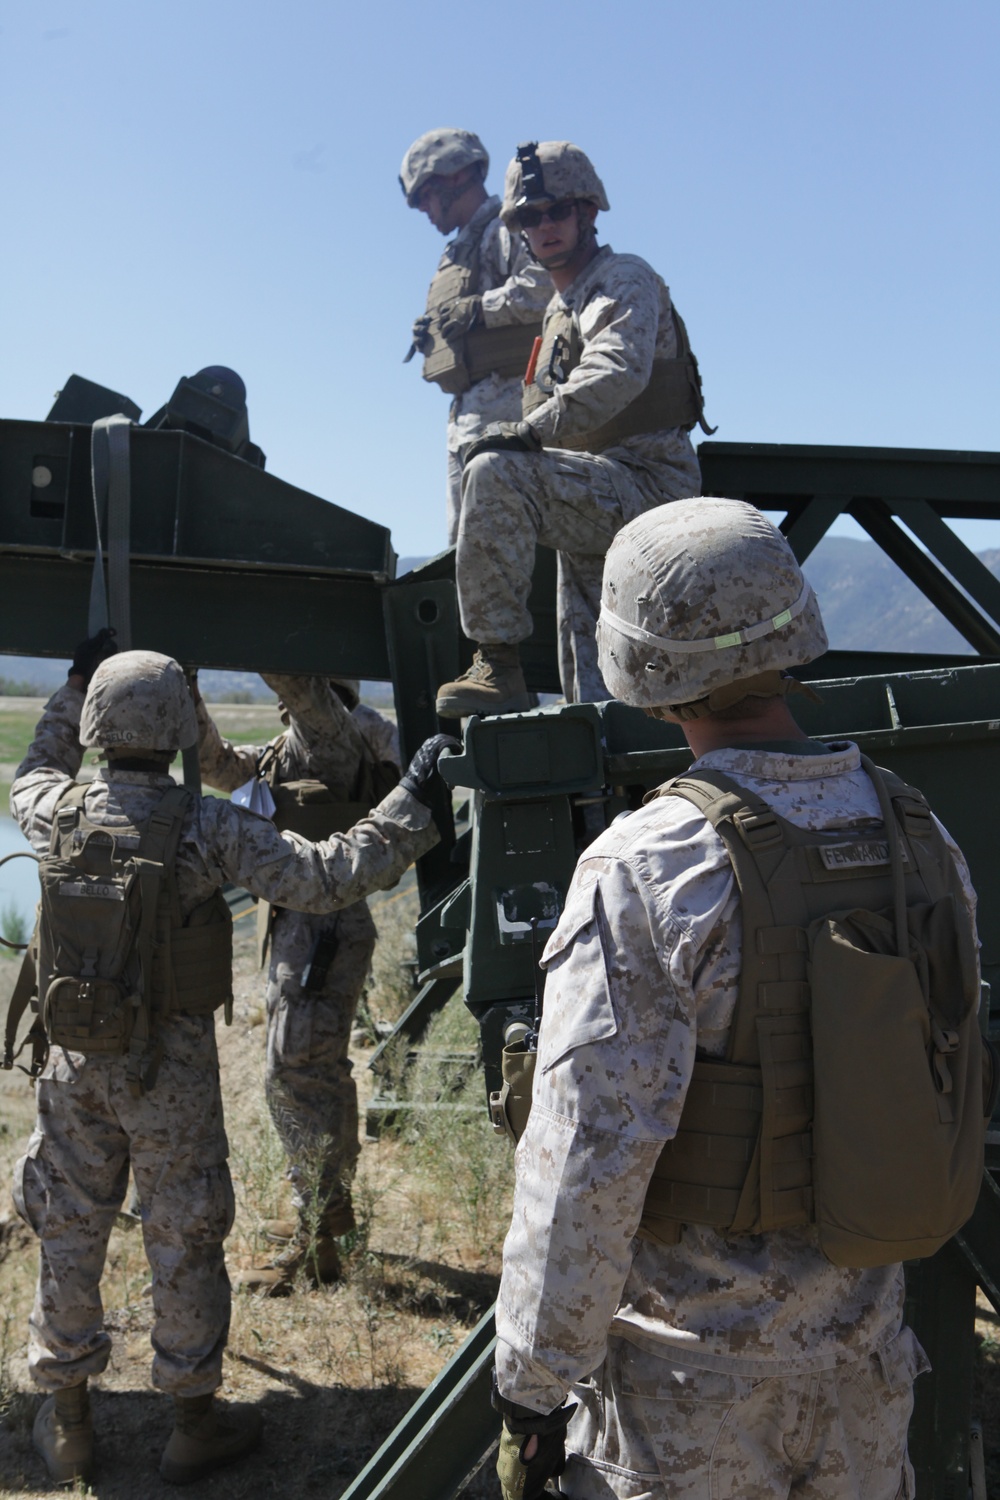 Marines show off versatility at Lake Elsinore during exercise